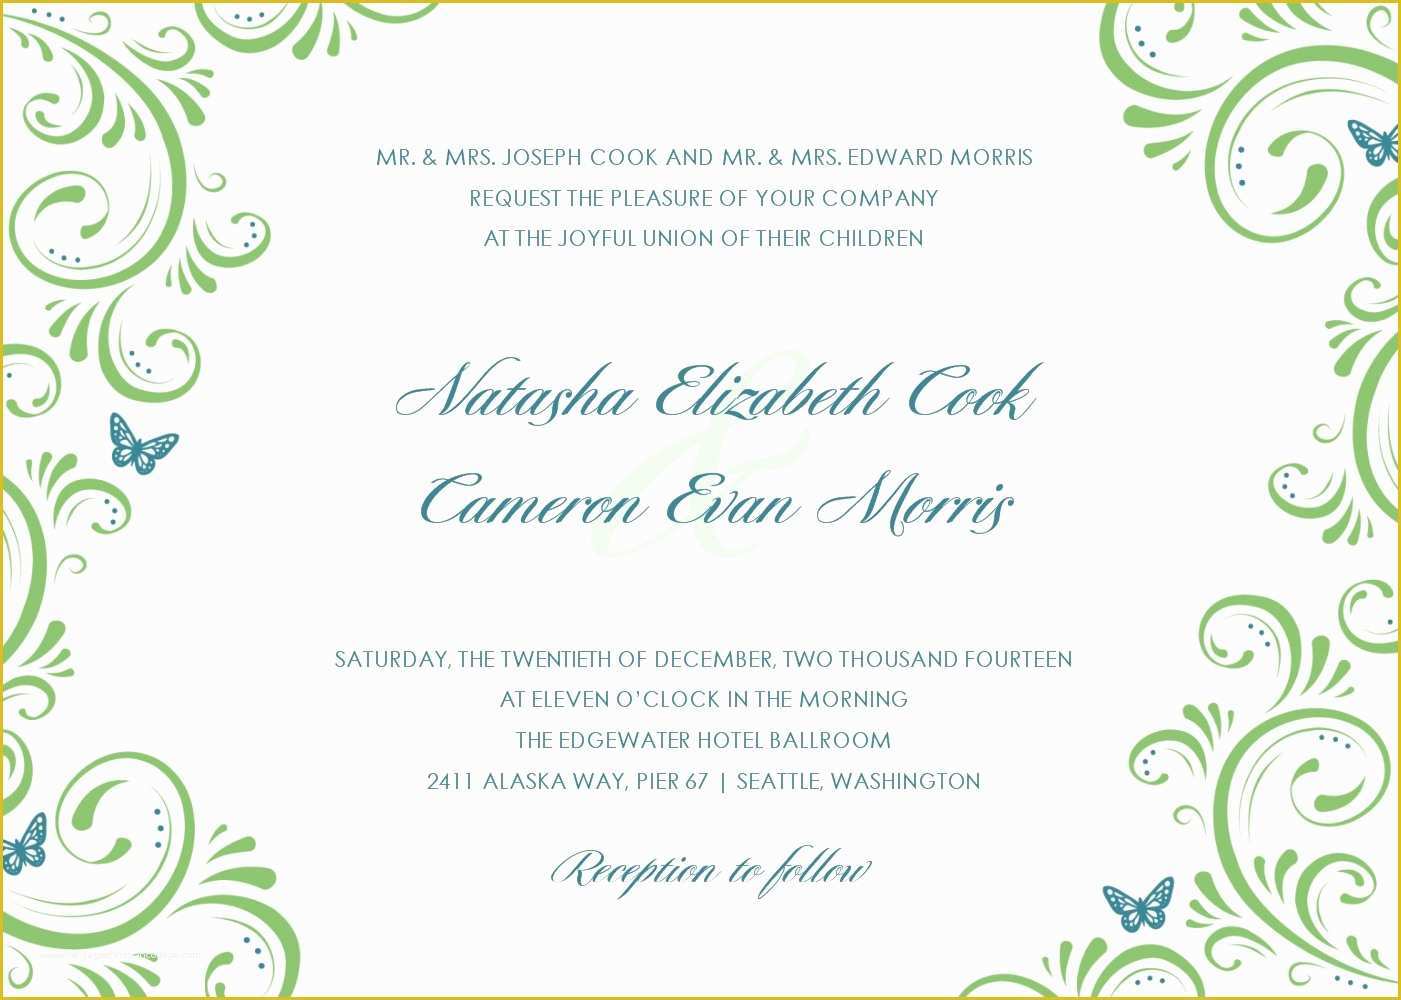 Invitation Card Template Free Of Wedding Invitations Cards Template